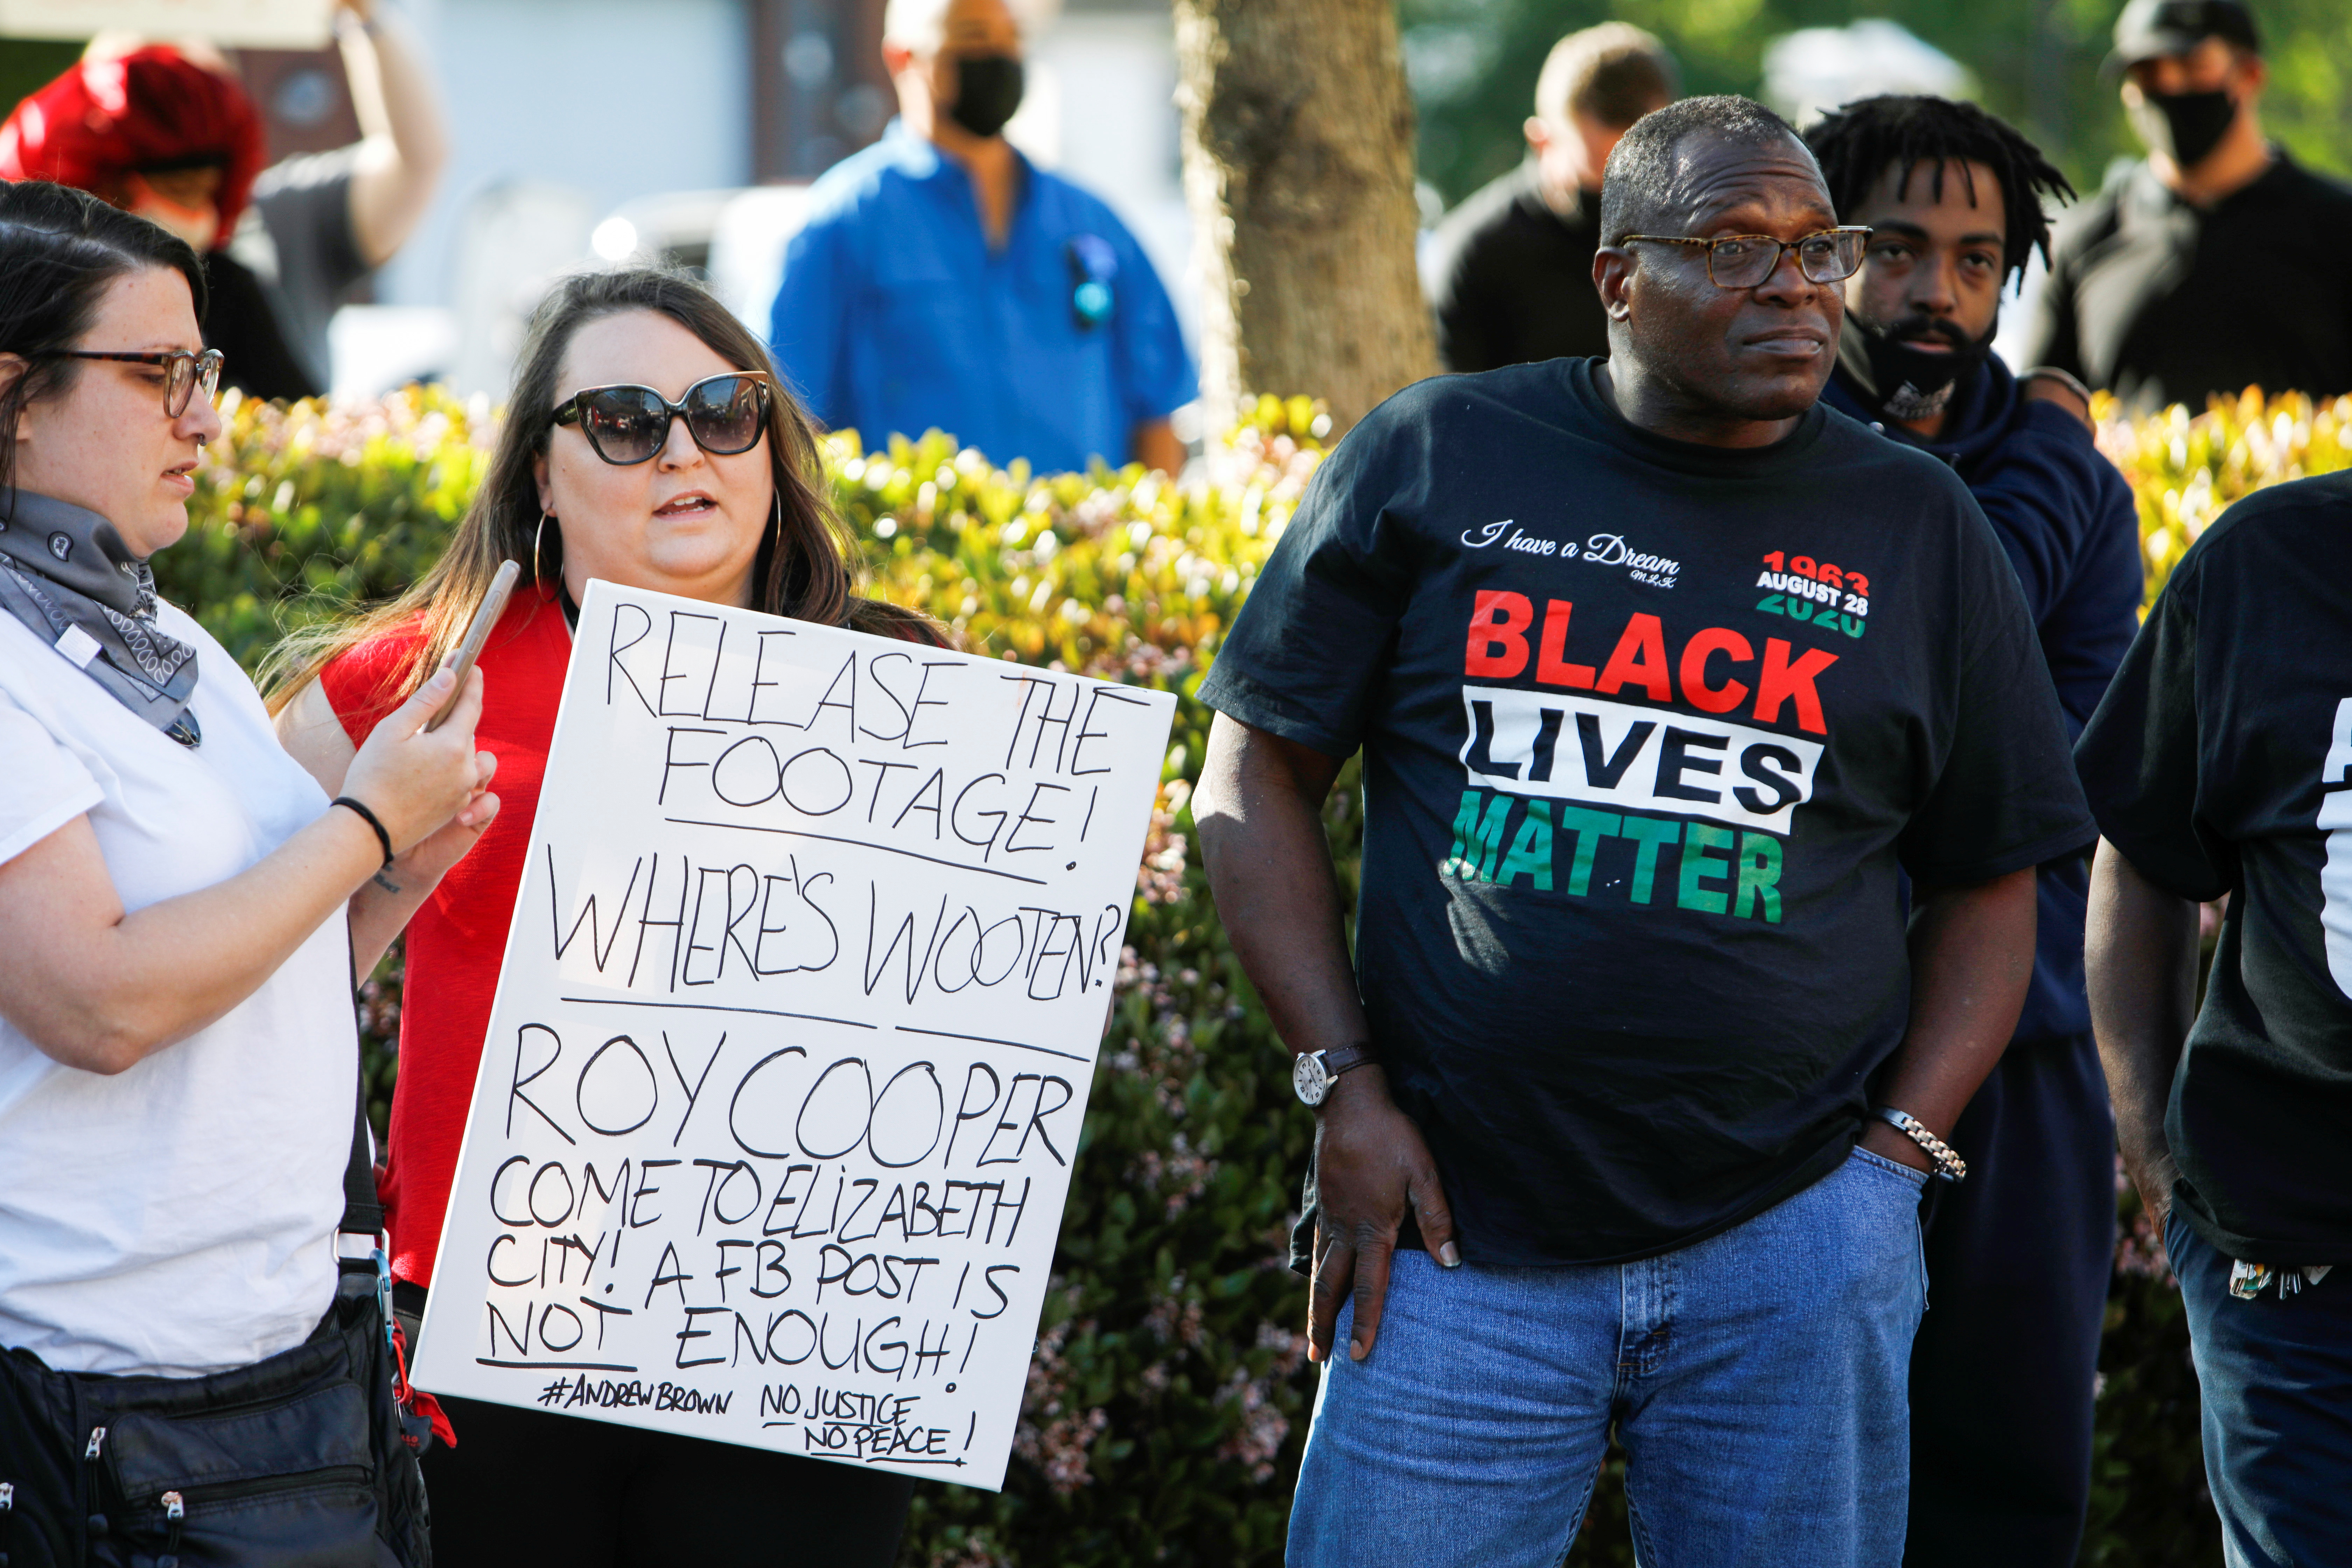 Protesters outside county sheriff’s building after a deputy Sheriff shot and killed a Black suspect in Elizabeth City